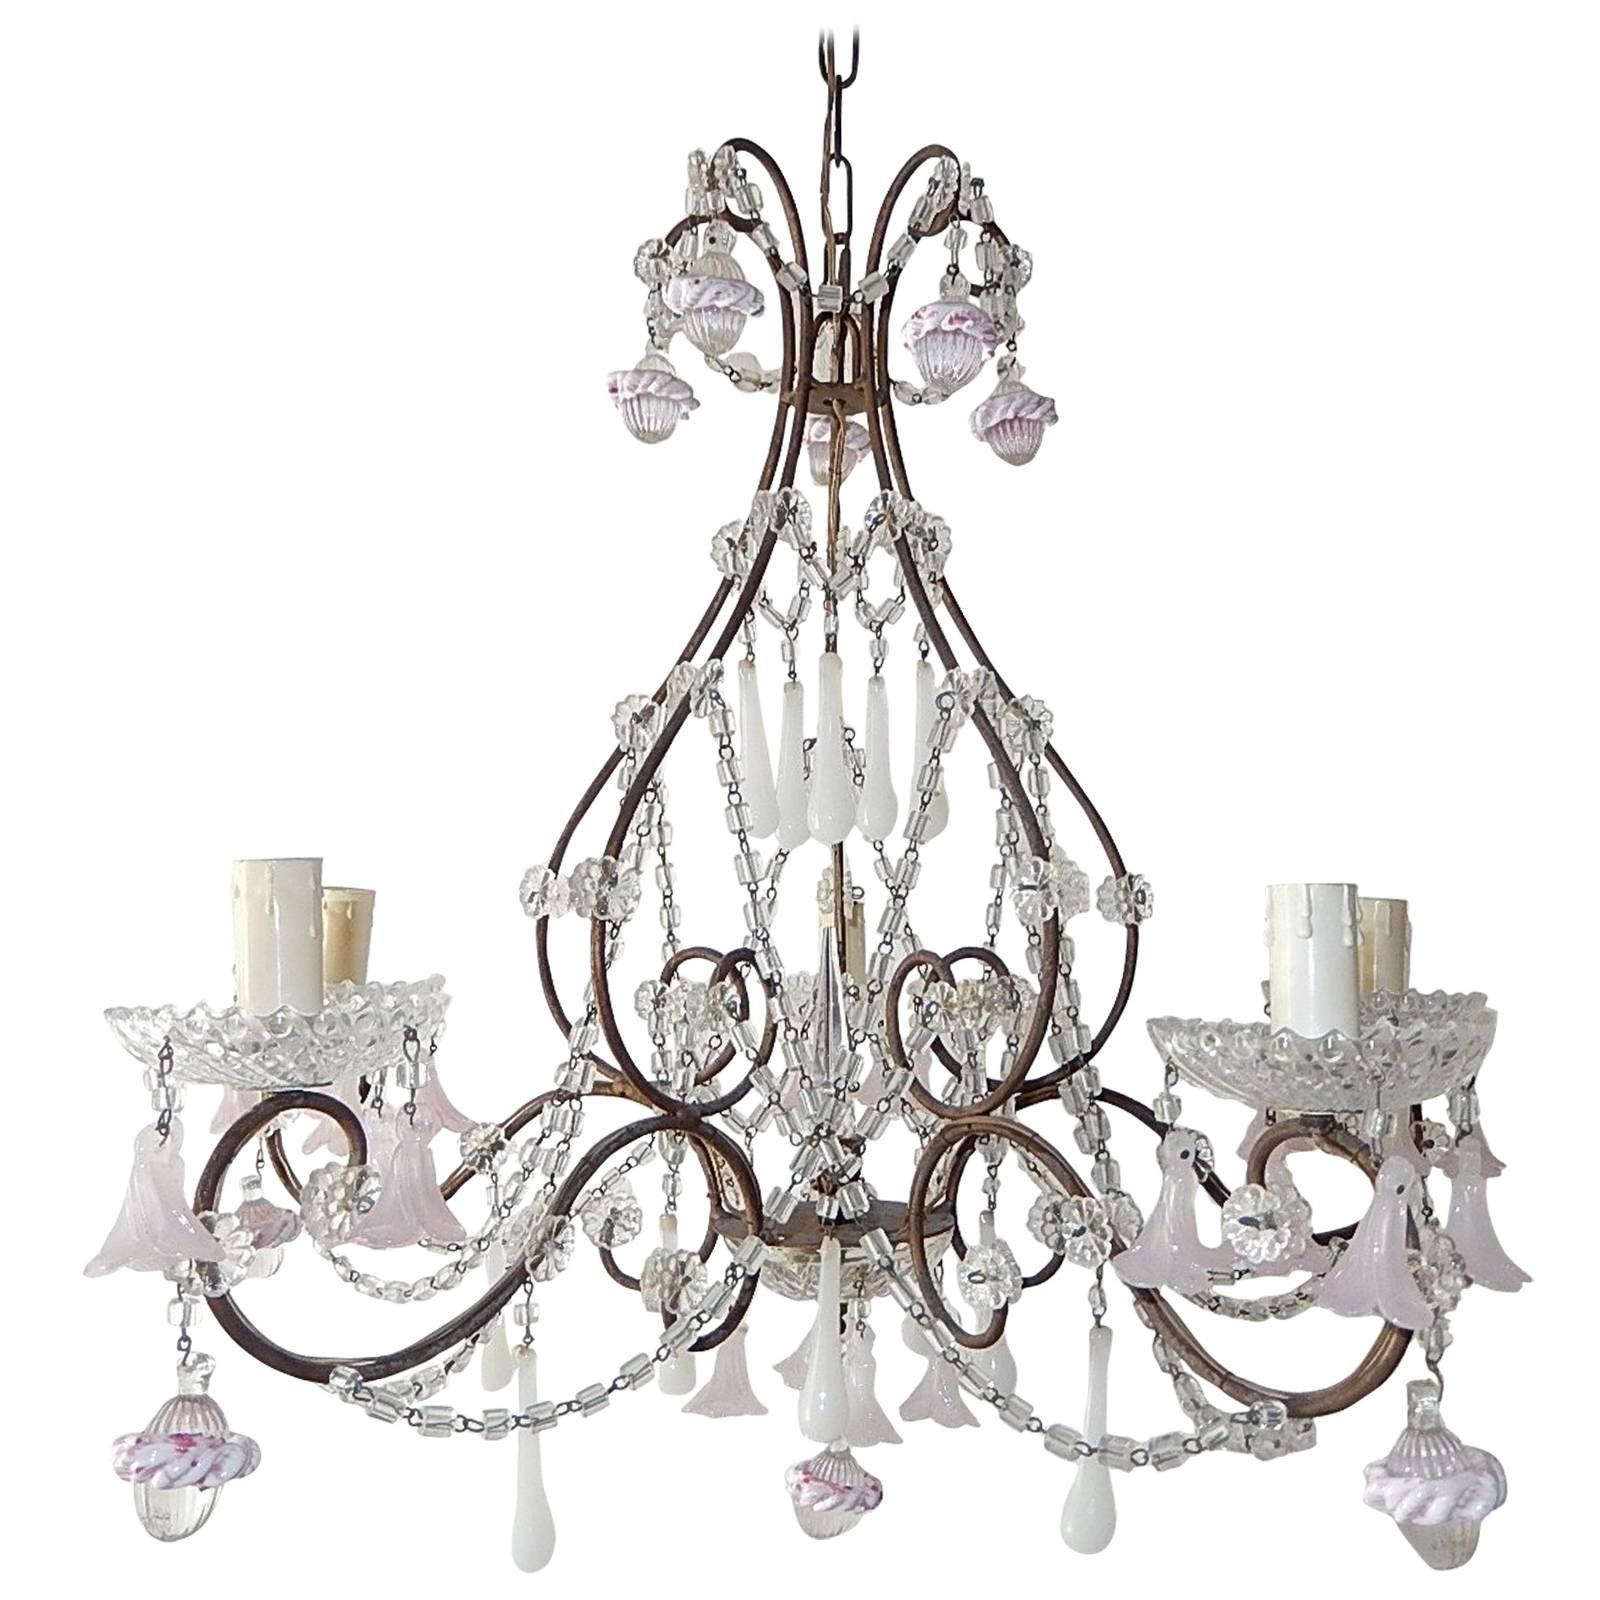 French Light Pink Flowers Opaline Murano Drops Chandelier, circa 1920